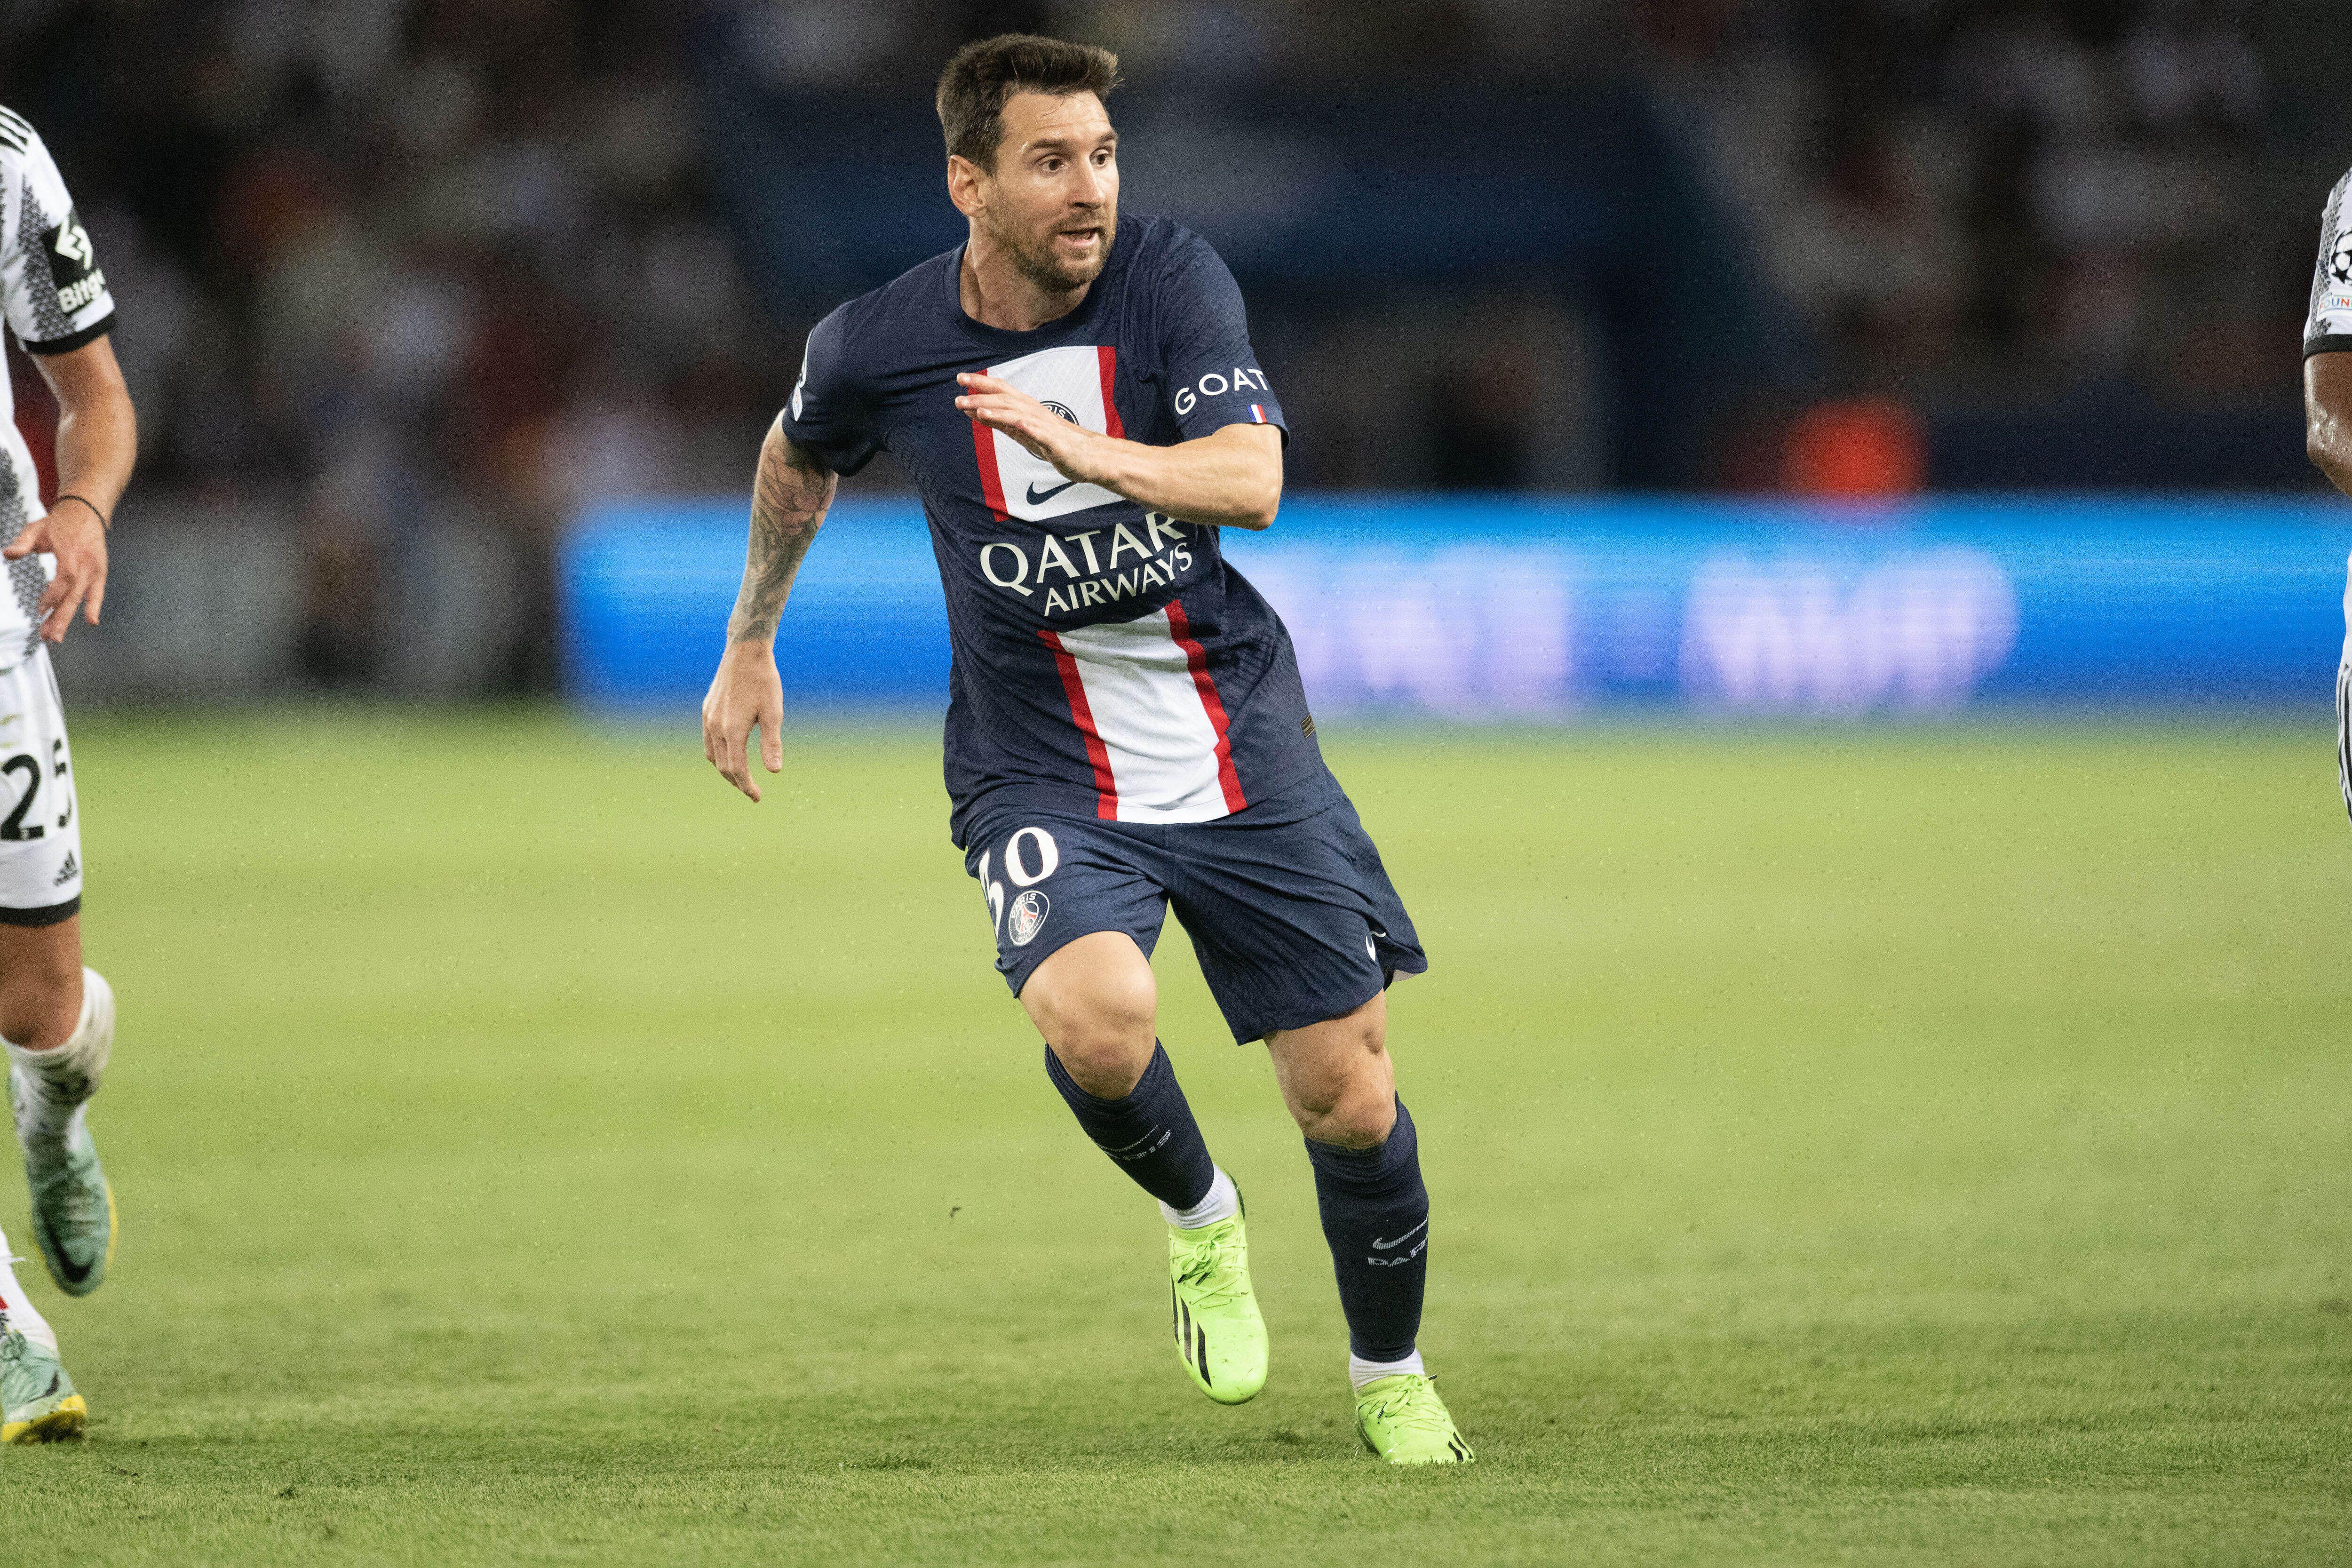 Champions League: The curious case of Messi's PSG sleeve: Why was he the  only player with 'GOAT' on his shirt?